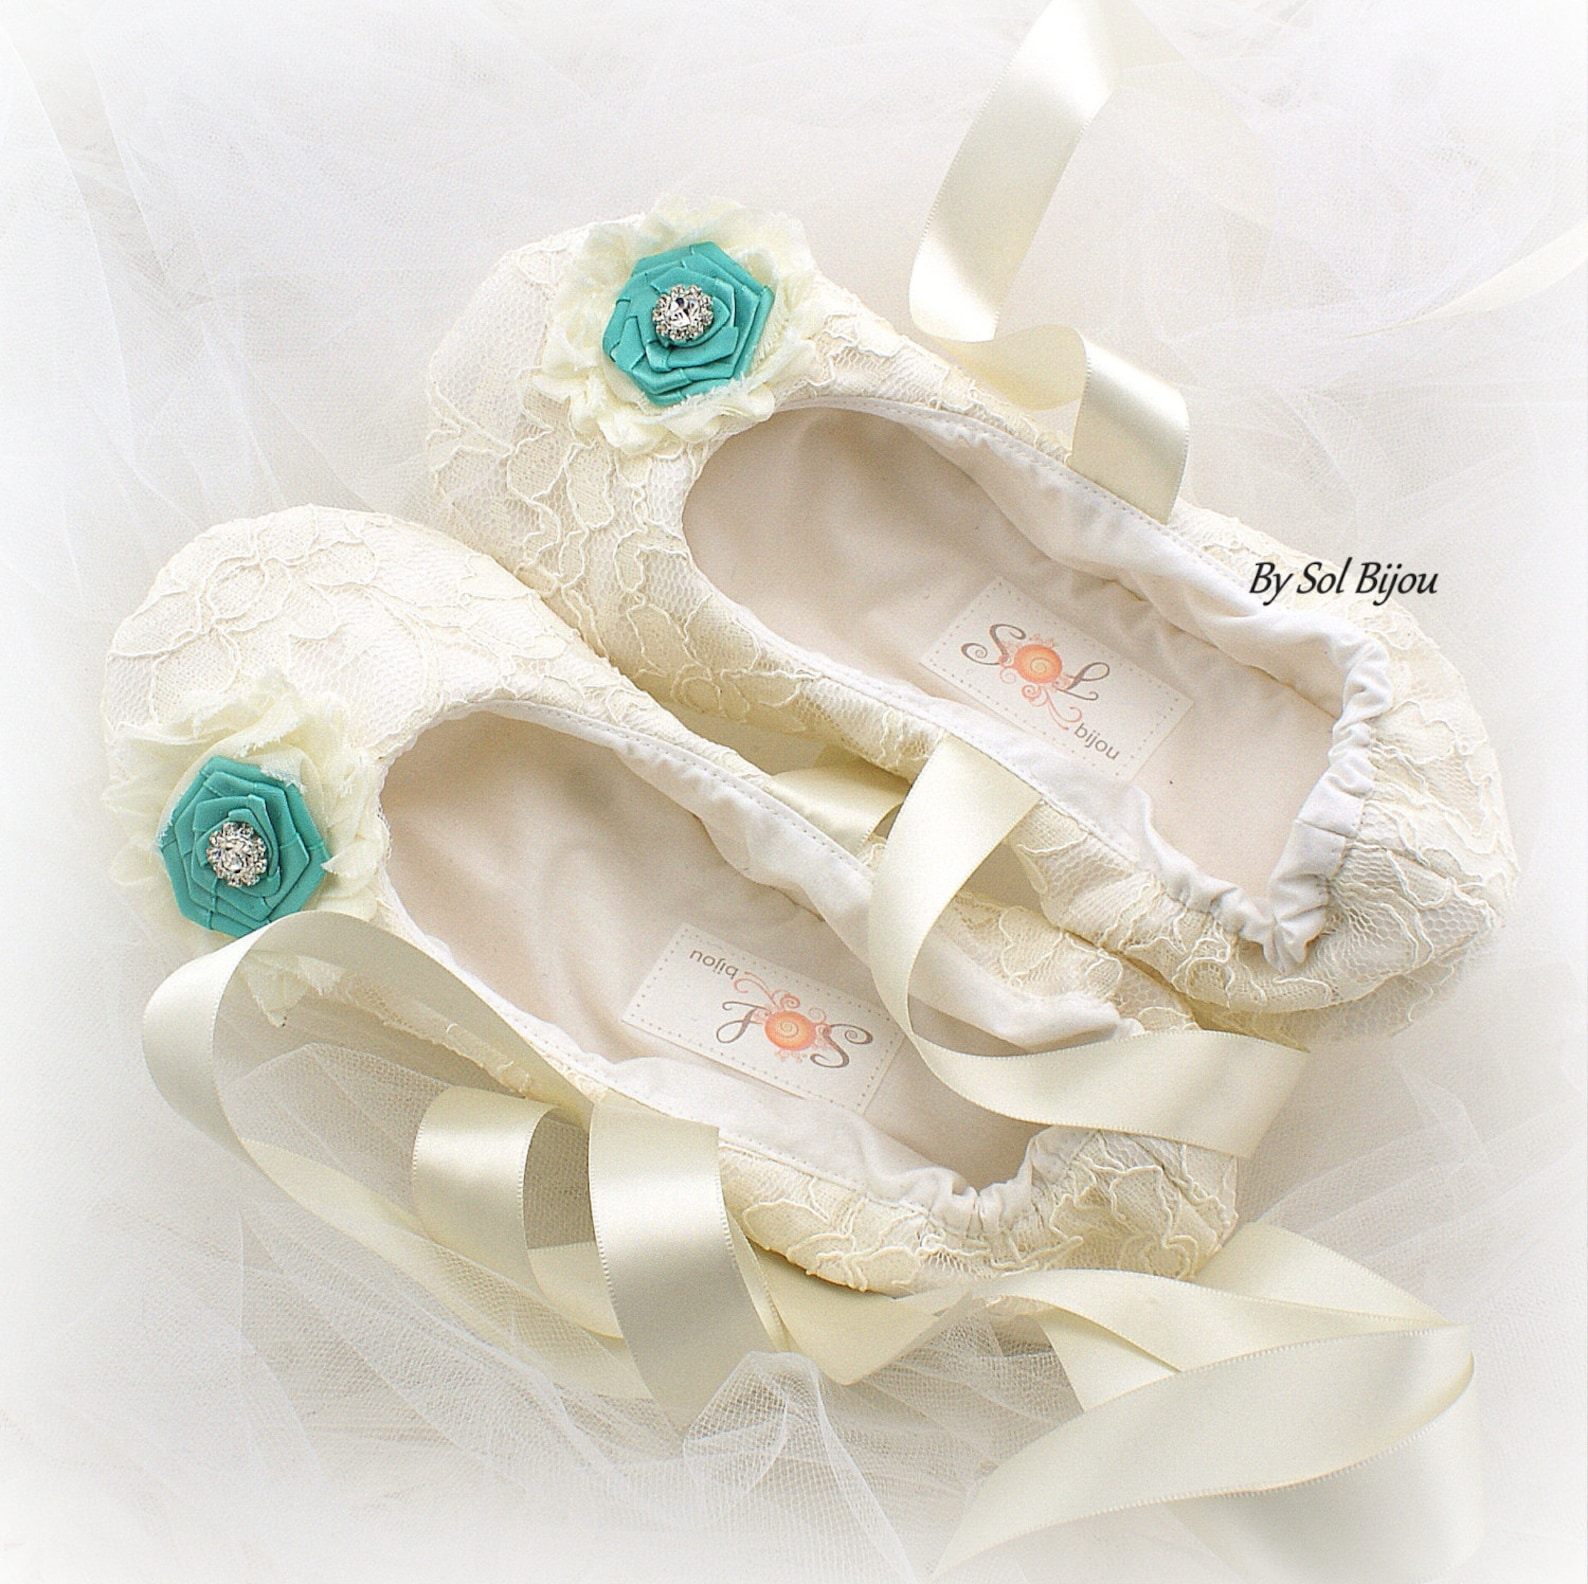 lace ballet flats,ivory and turquoise,aqua blue,ballet slippers,ballet flats,wedding, ballerina slippers,flower girl flats,vinta